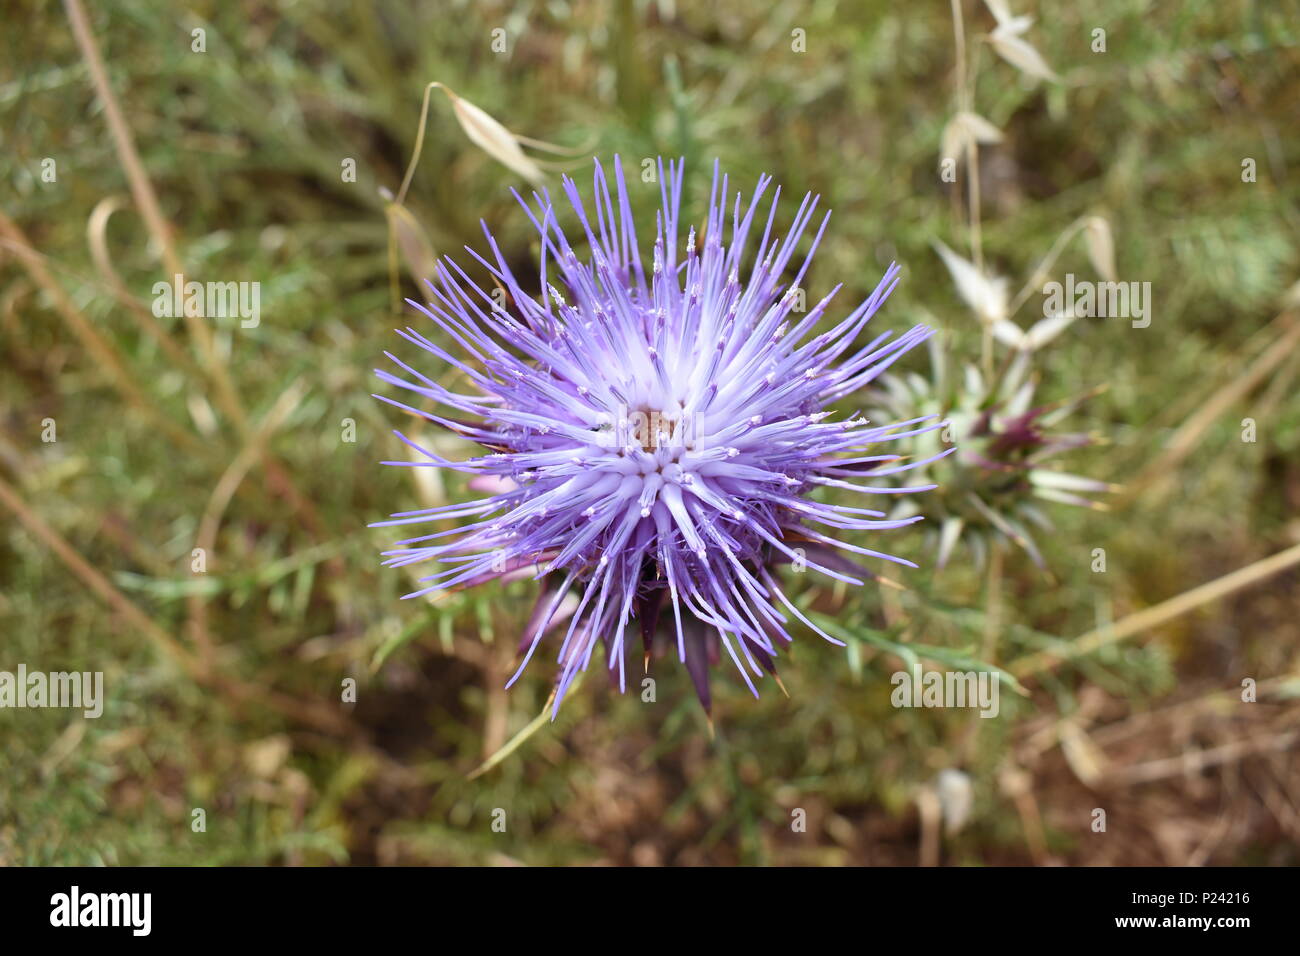 Top down close up of a spiky purple thistle (Cynareae) flower growing in the Algarve countryside, Portugal. Stock Photo